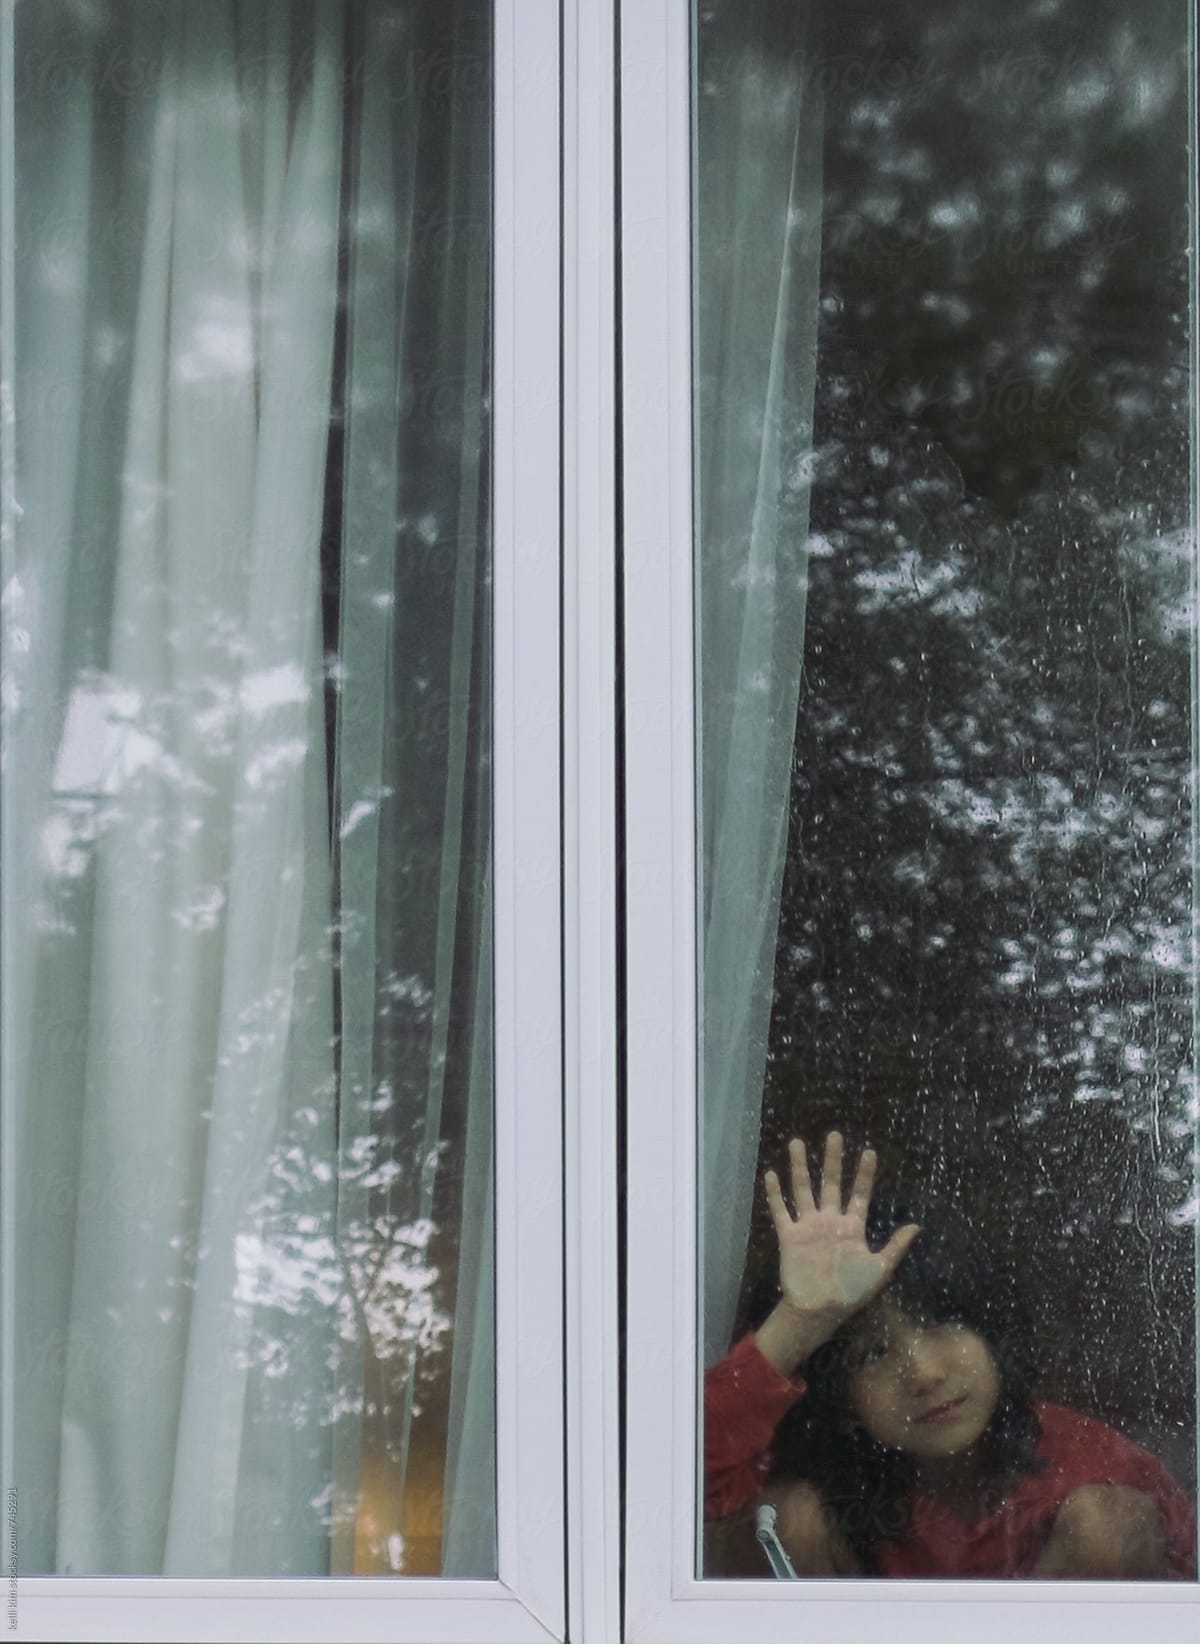 Young boy in window